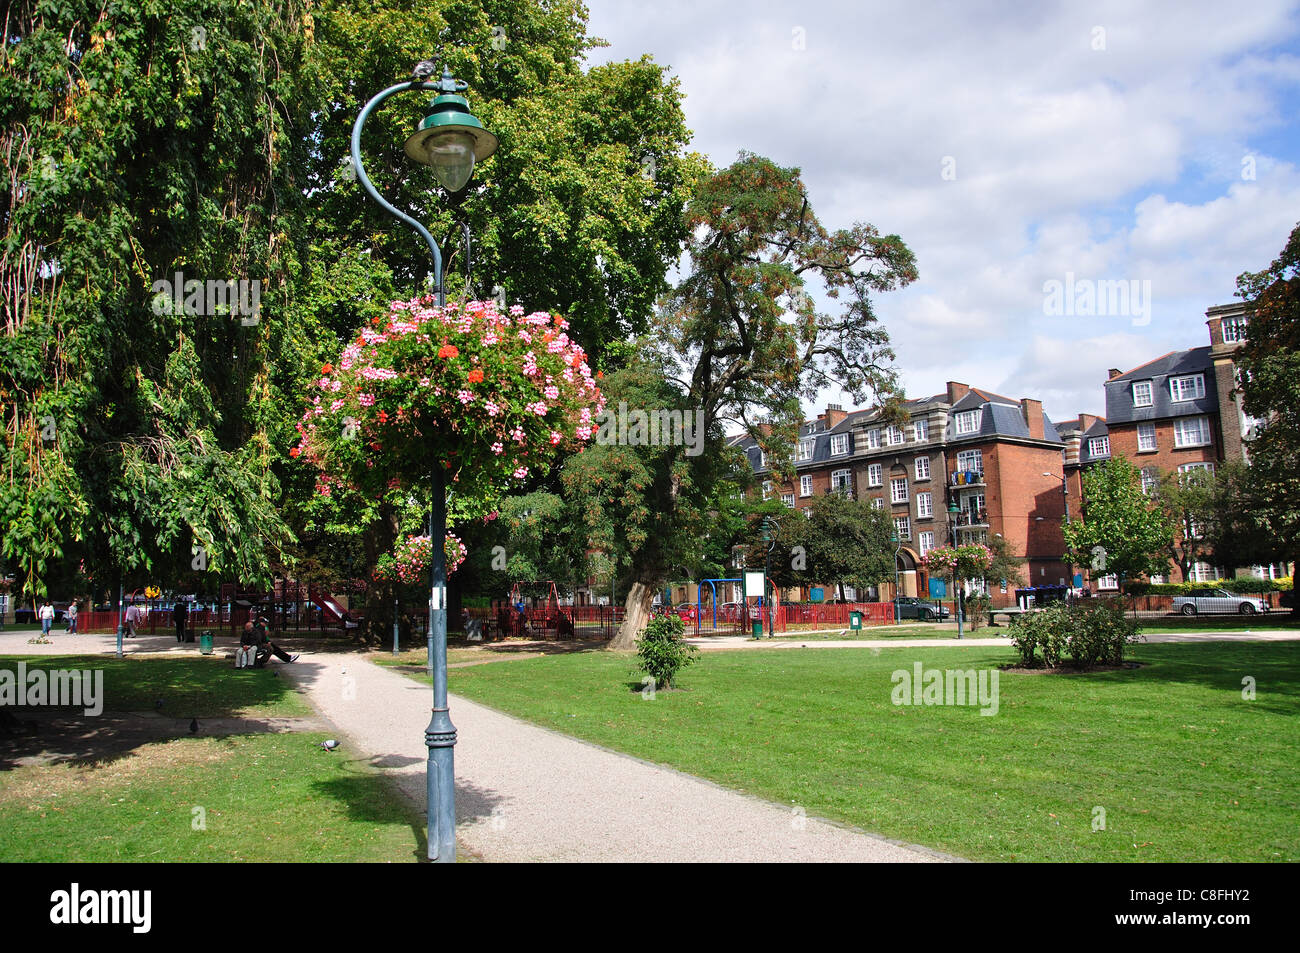 Camberwell Green, Camberwell, London Borough of Southwark, London, Greater London, Angleterre, Royaume-Uni Banque D'Images